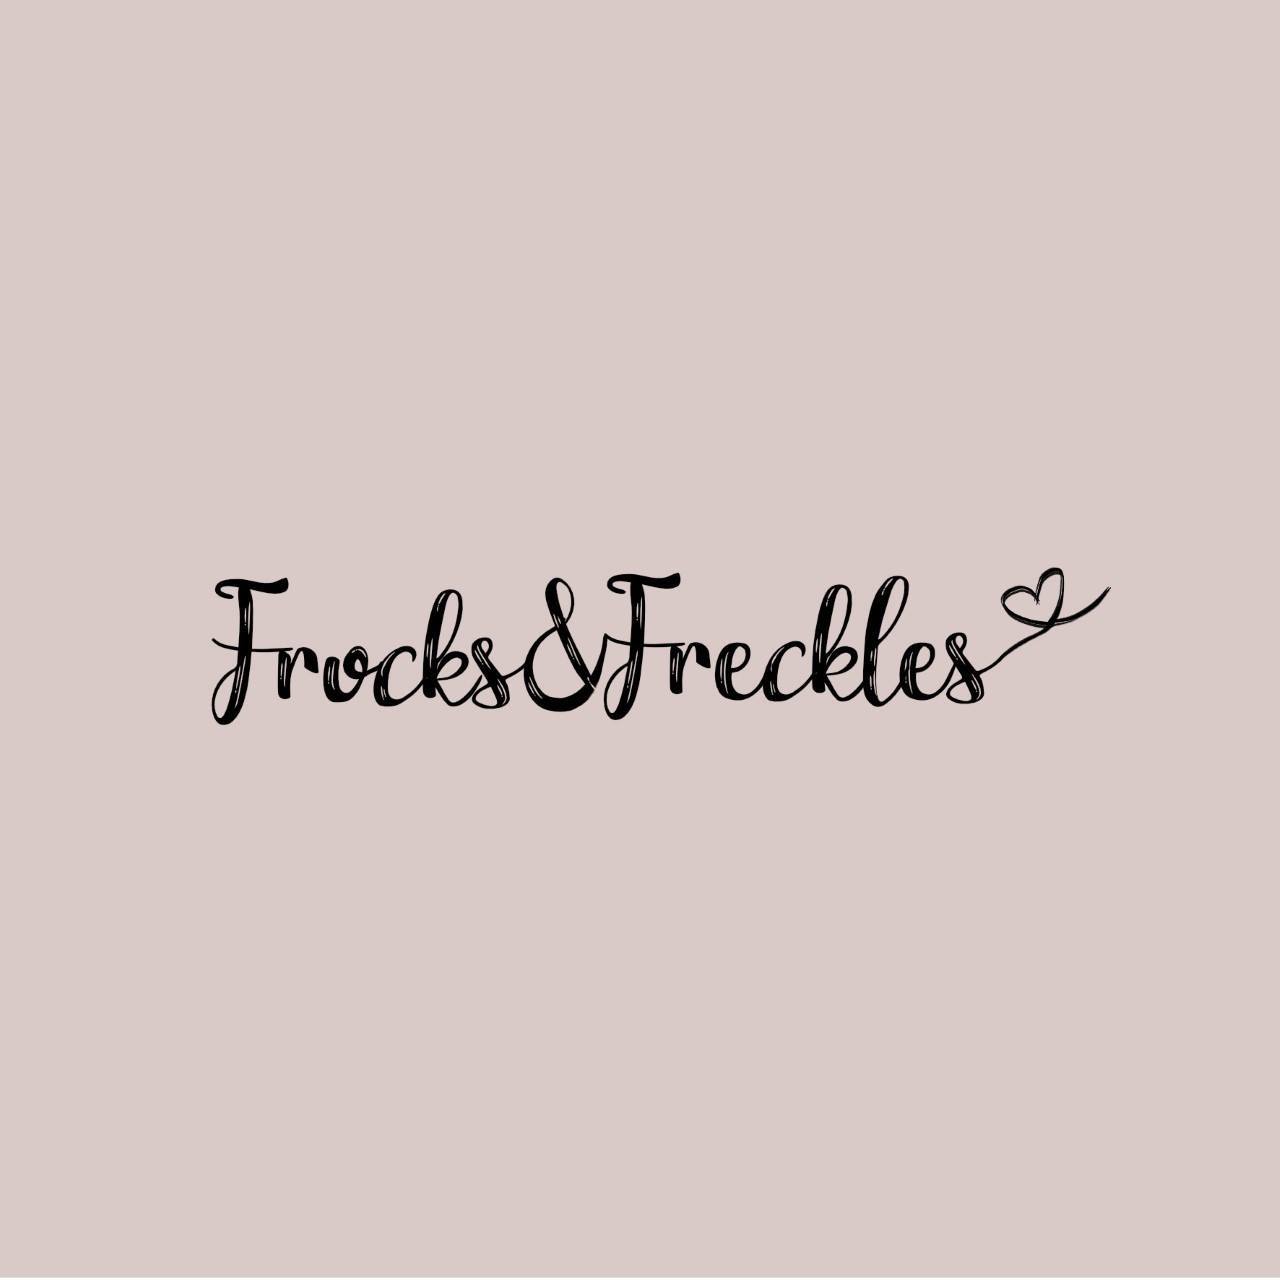 EXHIBITOR: Frocks & Freckles